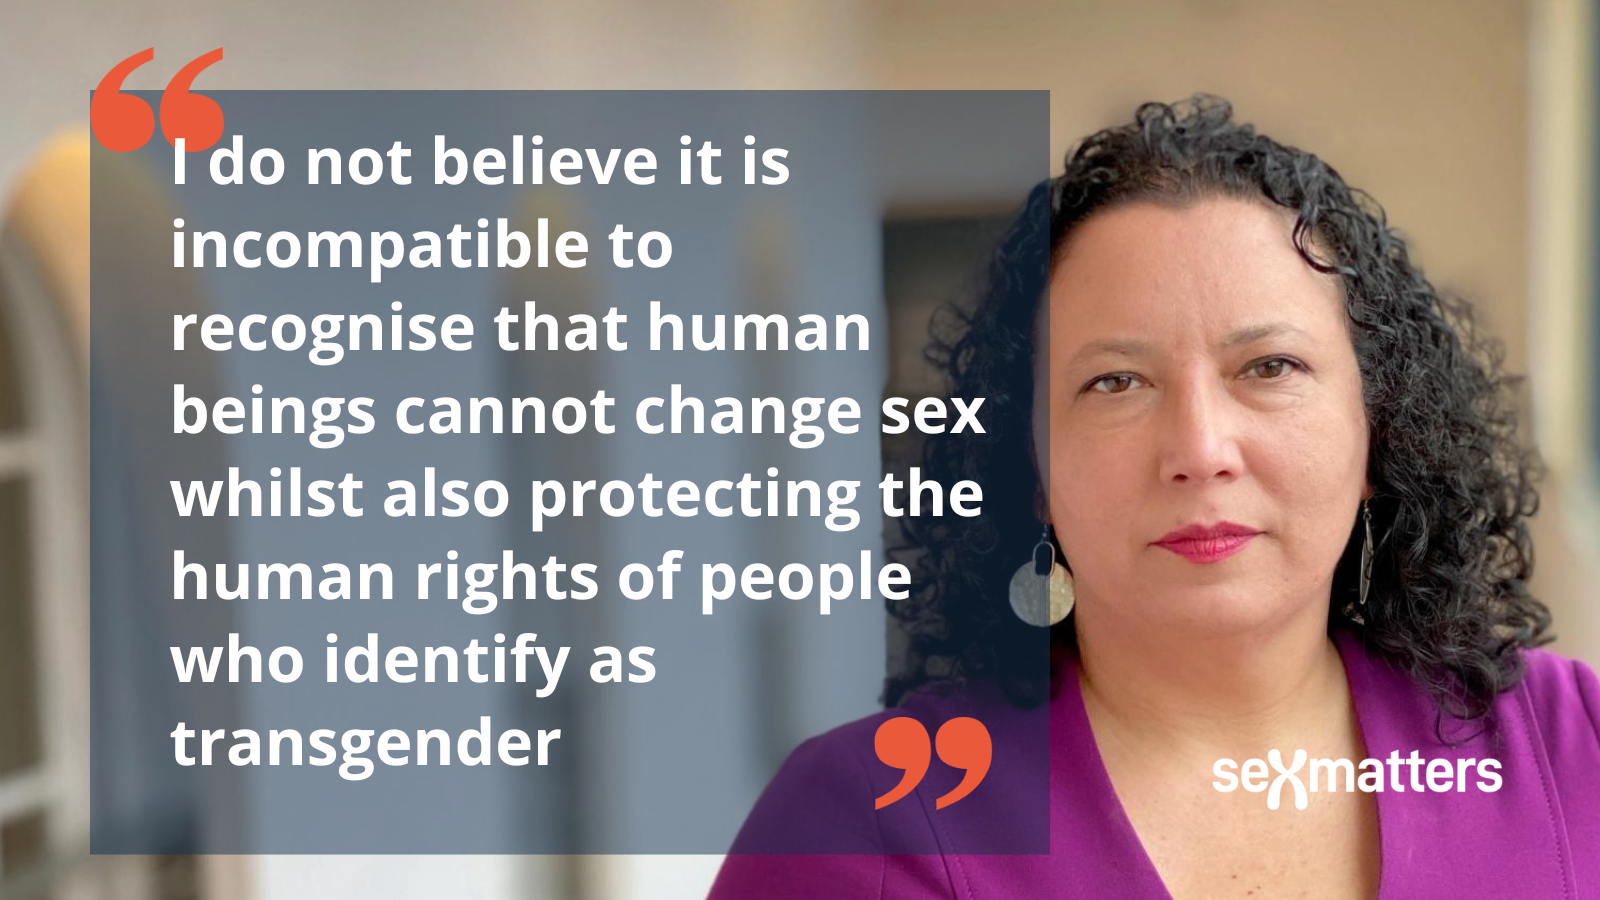 I do not believe it is incompatible to recognise that human beings cannot change sex whilst also protecting the human rights of people who identify as transgender